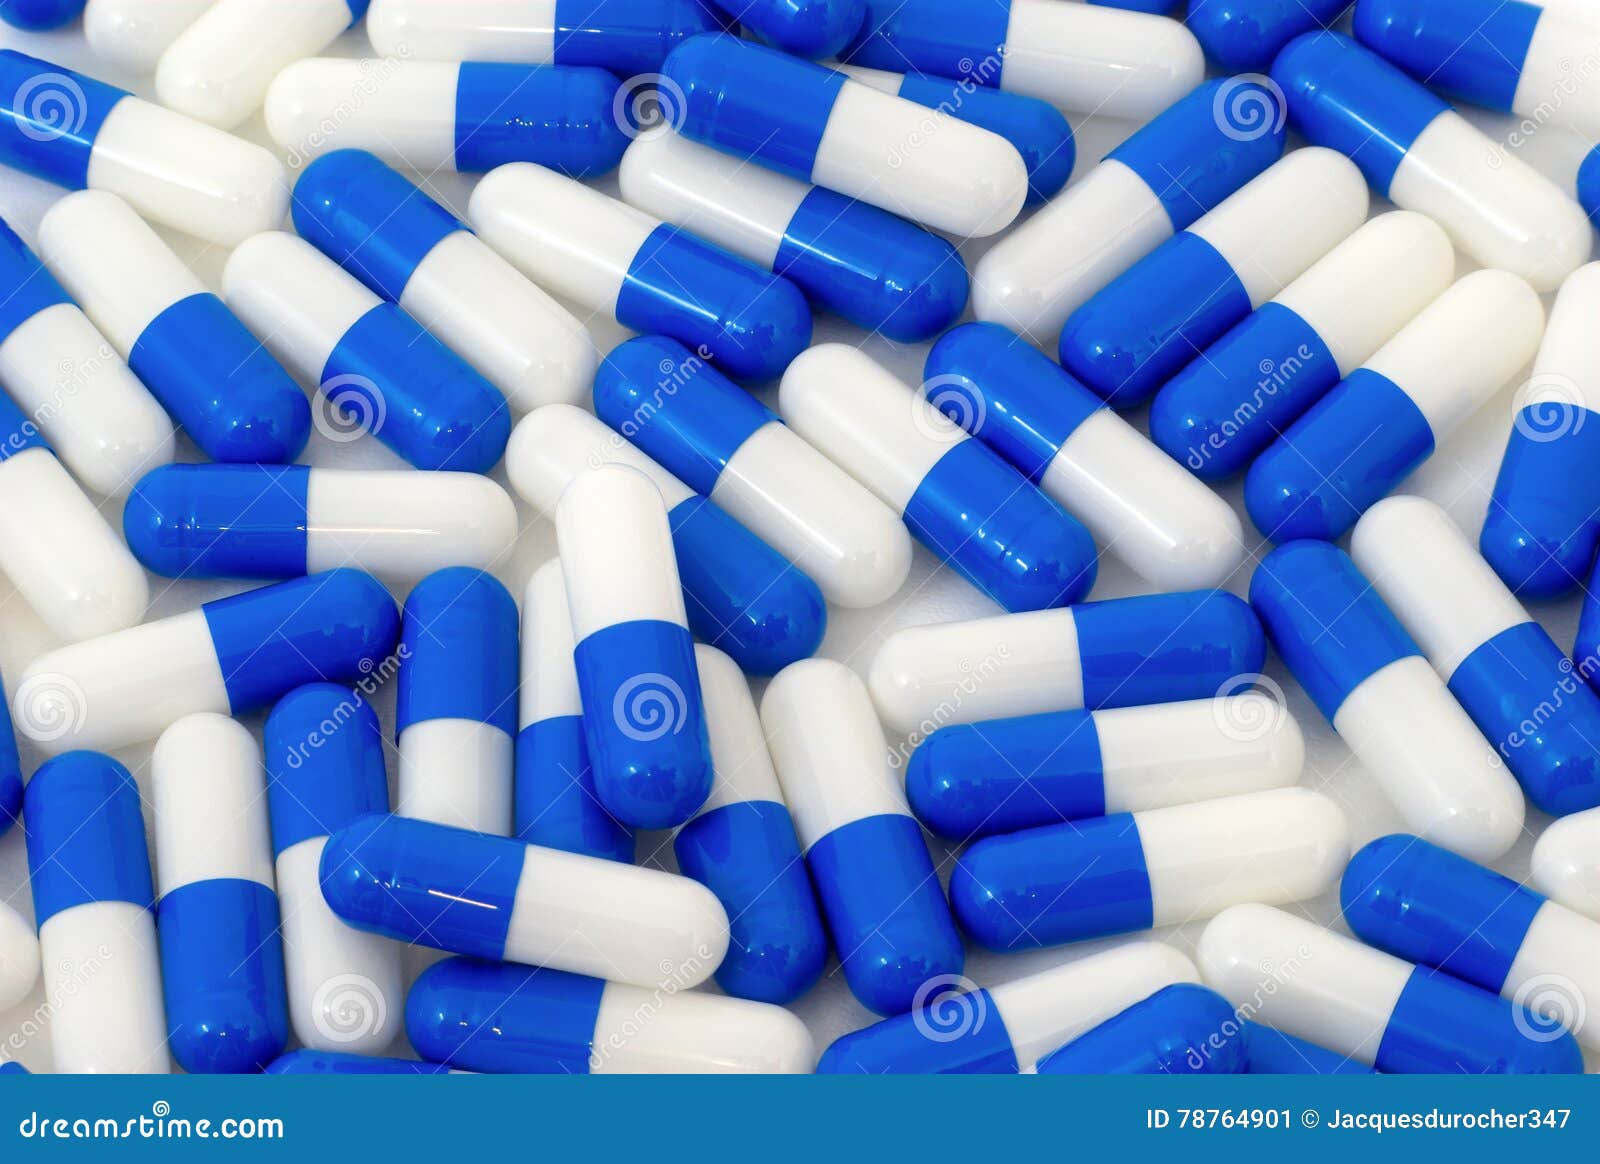 Many Blue And White Pills Capsules Background Stock Image ...